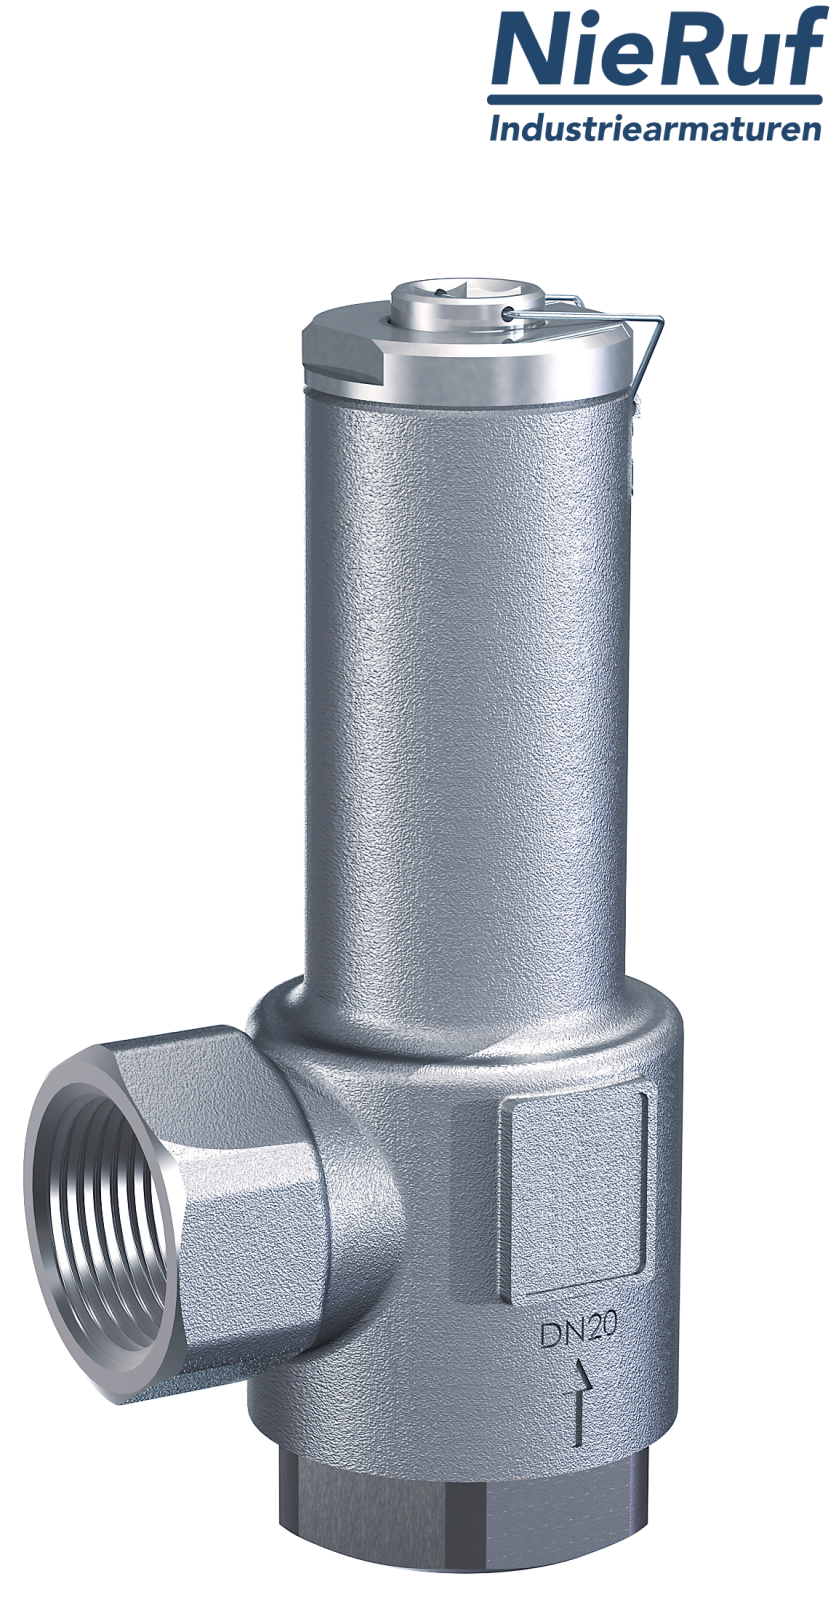 angle-type overflow valve 1" inch fm UV03 stainless steel AISI 316L 2 - 12 bar